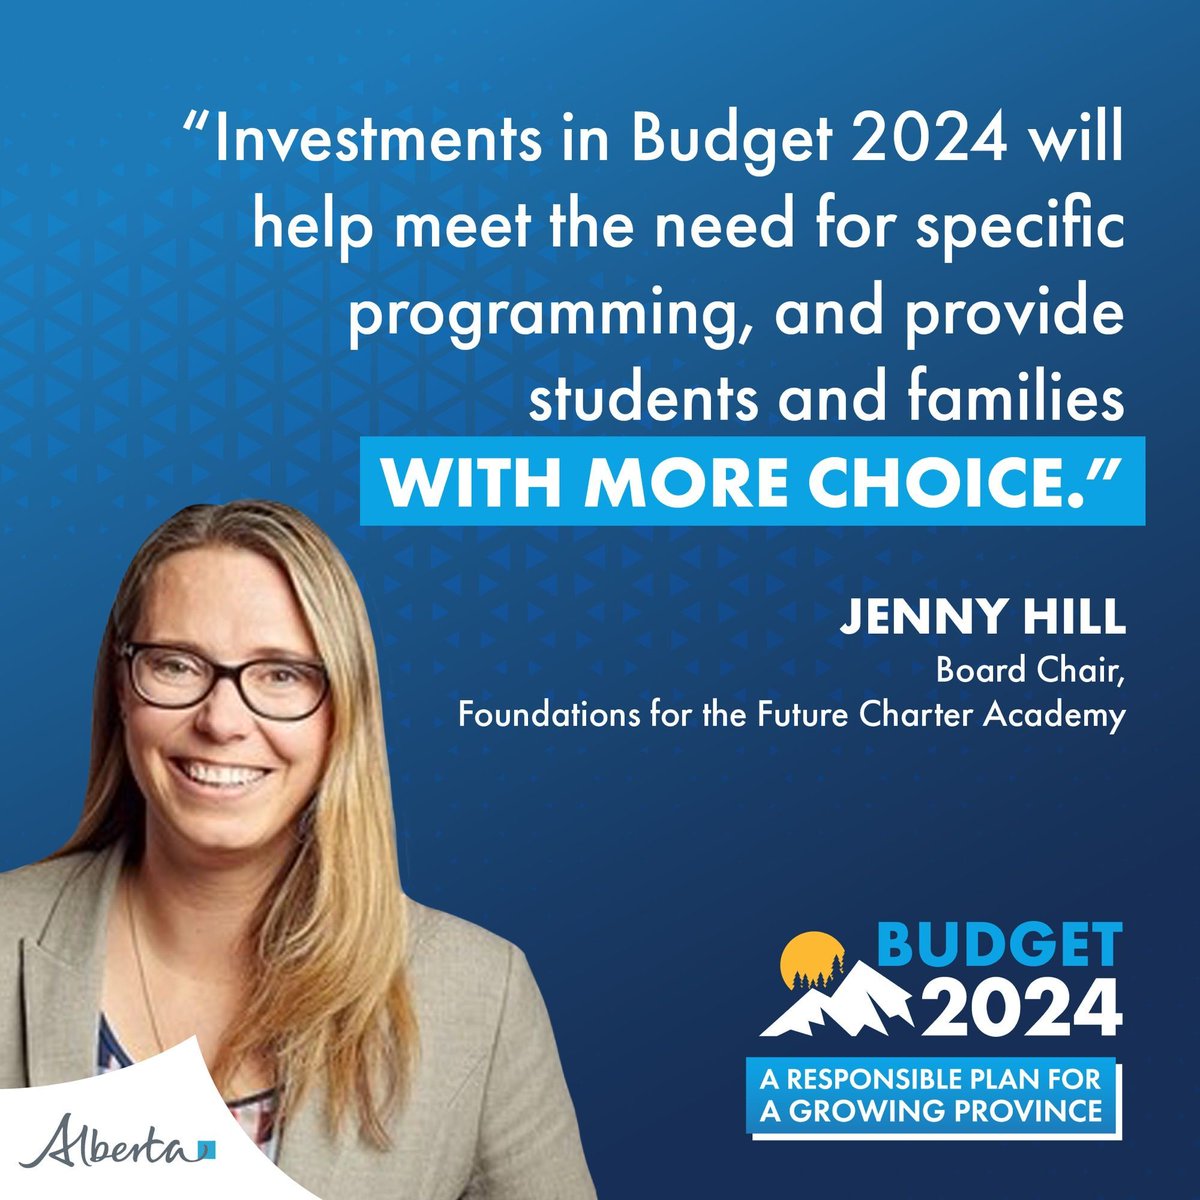 Alberta’s conservative government has a proud and long history of supporting school choice, and budget 2024 supports our ongoing commitment.